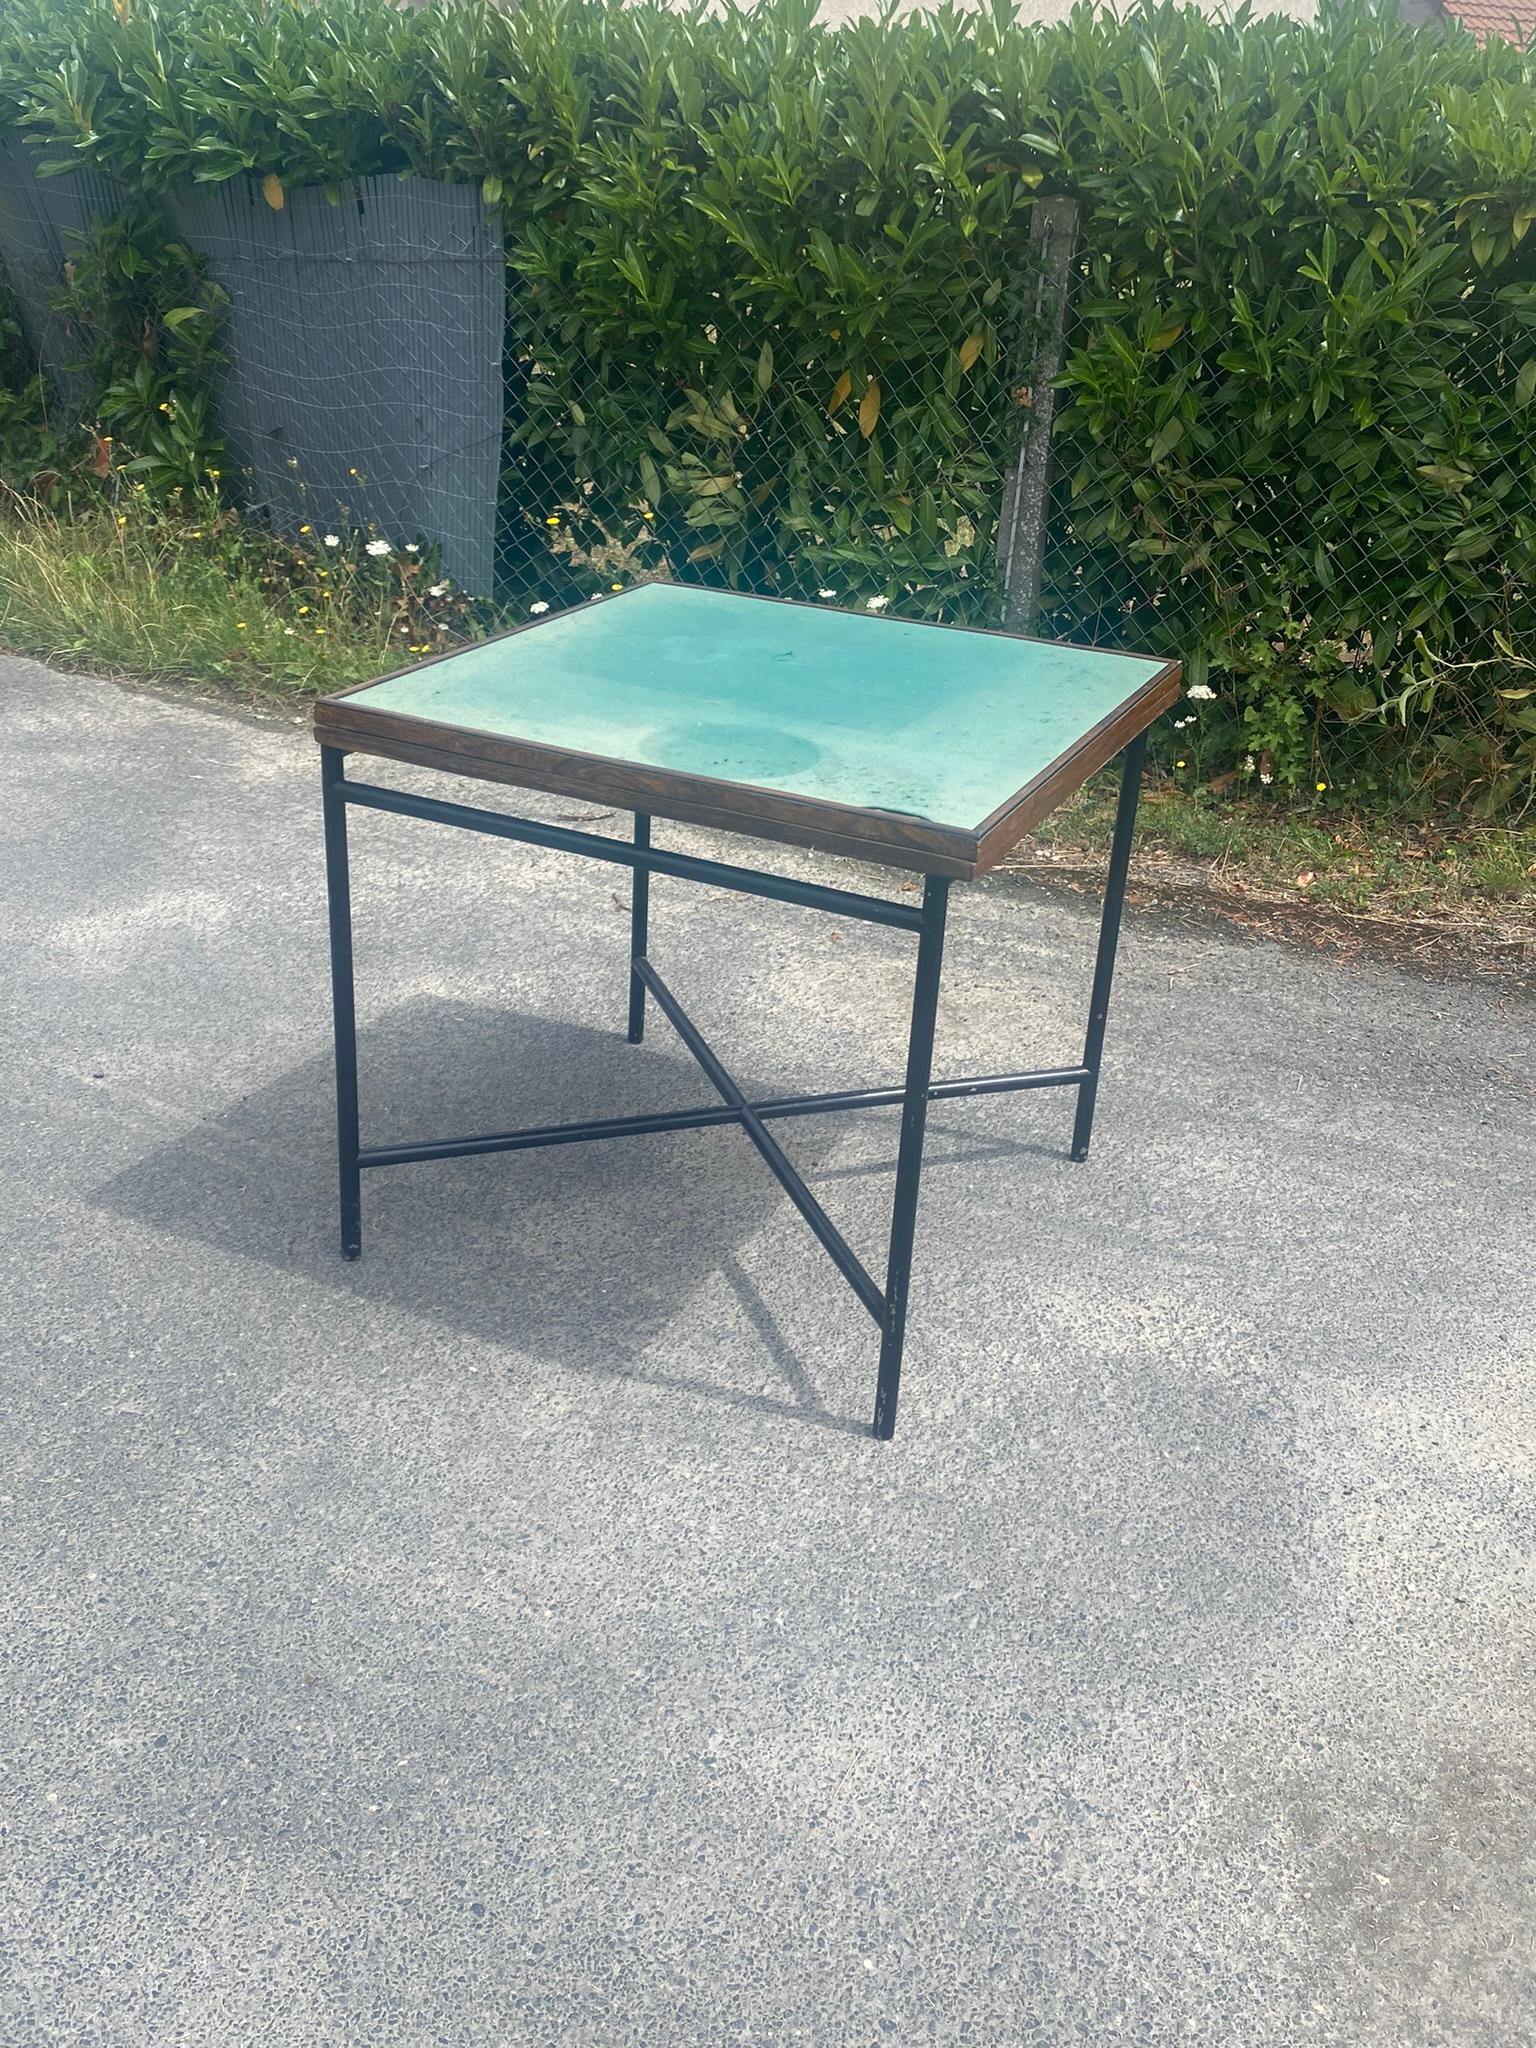 Game table and art deco modernist system table circa 1930
repainted base, original nickel-plated metal